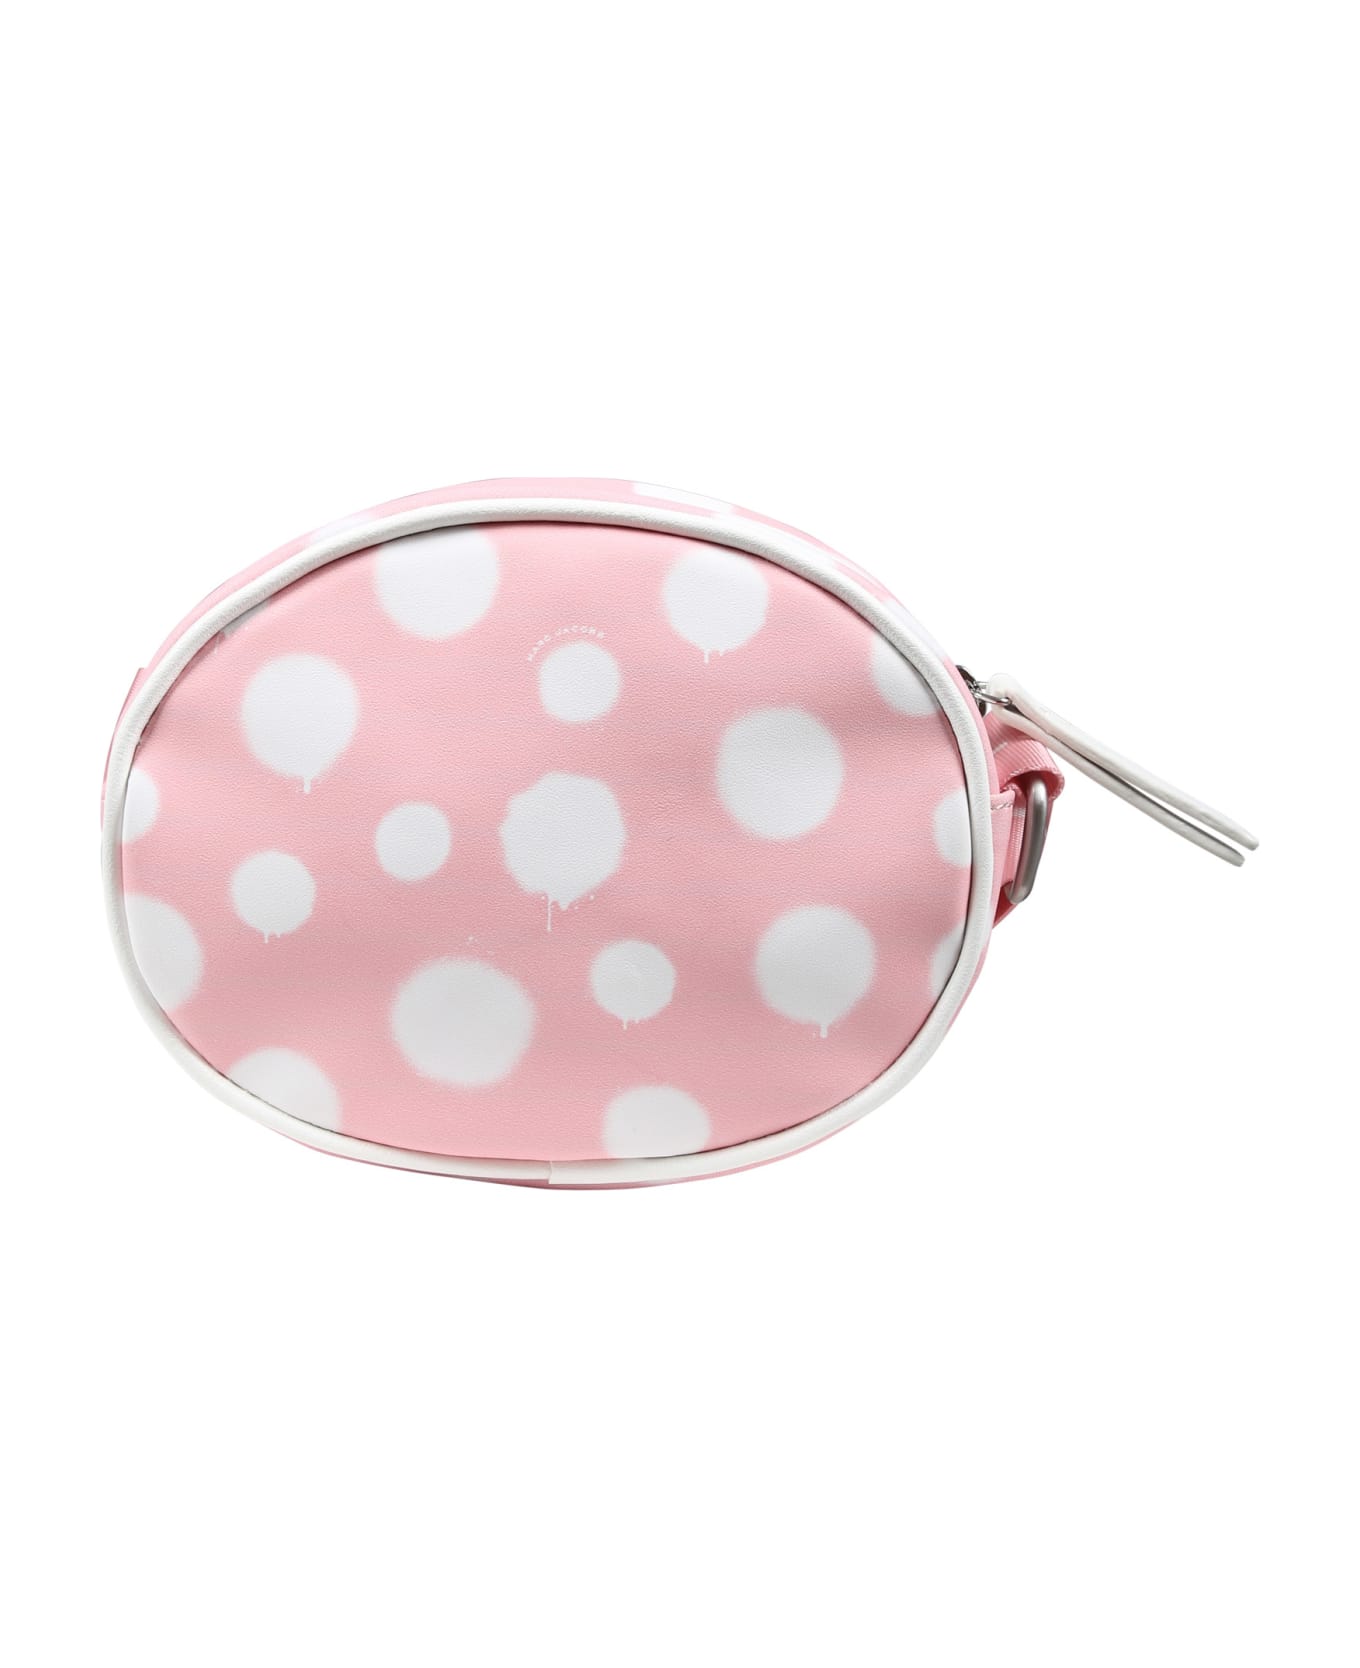 Little Marc Jacobs Pink Bag For Girl With All-over White Polka Dots - T Rosa Rosa Antico アクセサリー＆ギフト